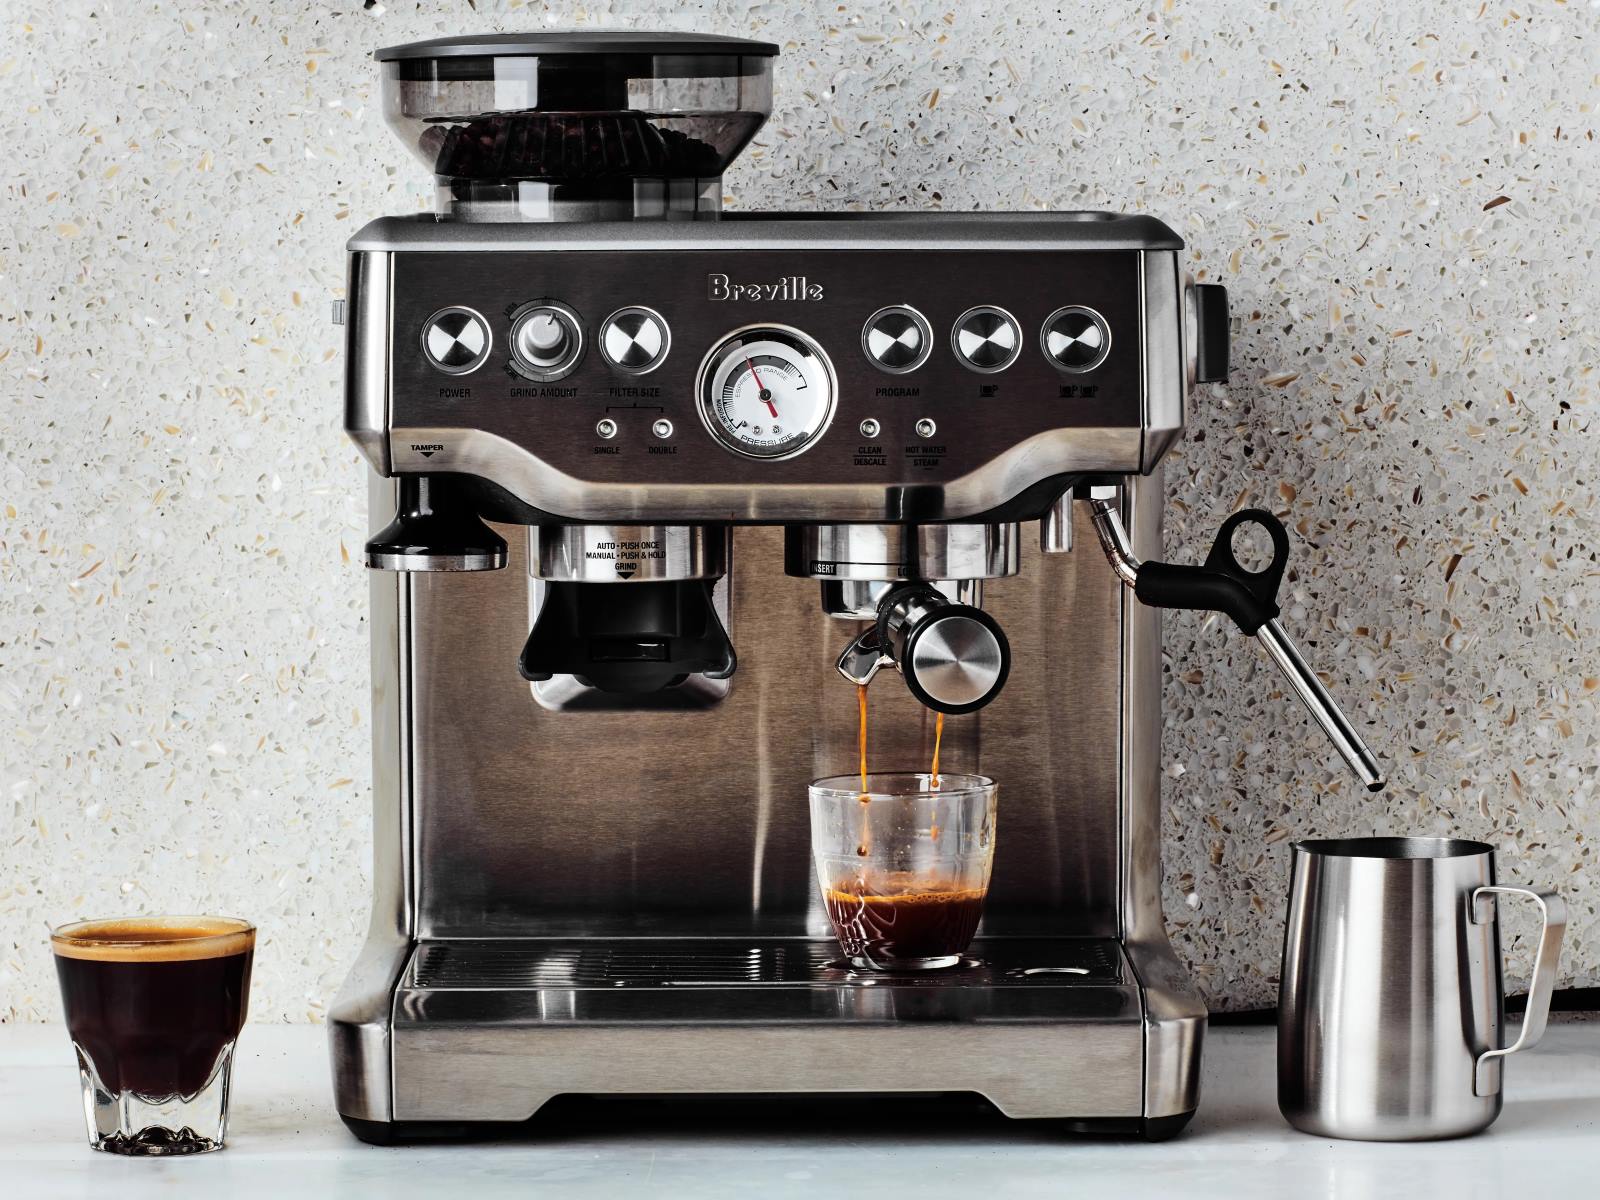 Top Coffee Machine Review: Find the Perfect Brew